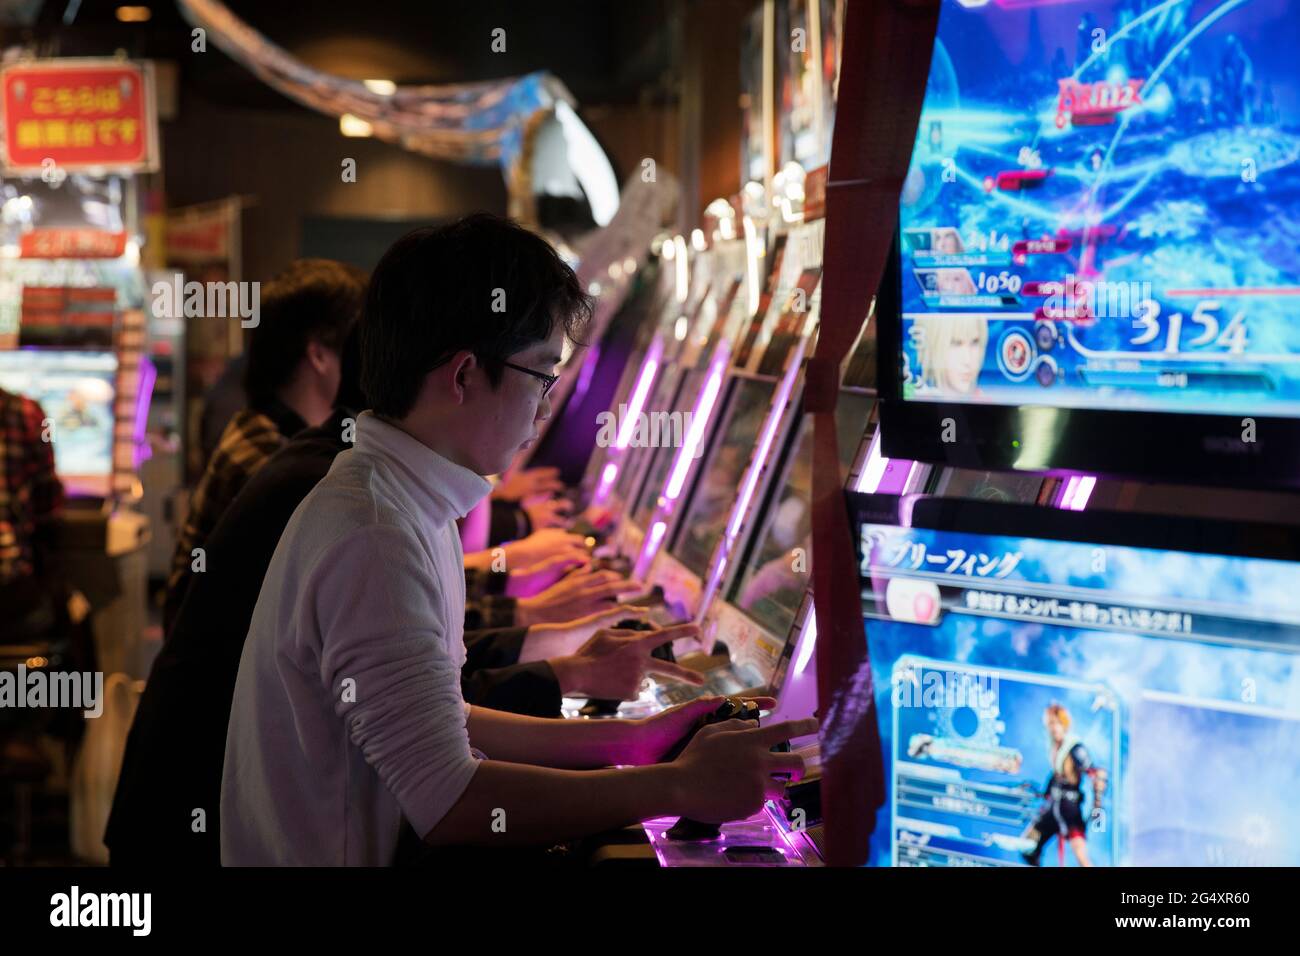 People playing videogames in a Japanese arcade Stock Photo